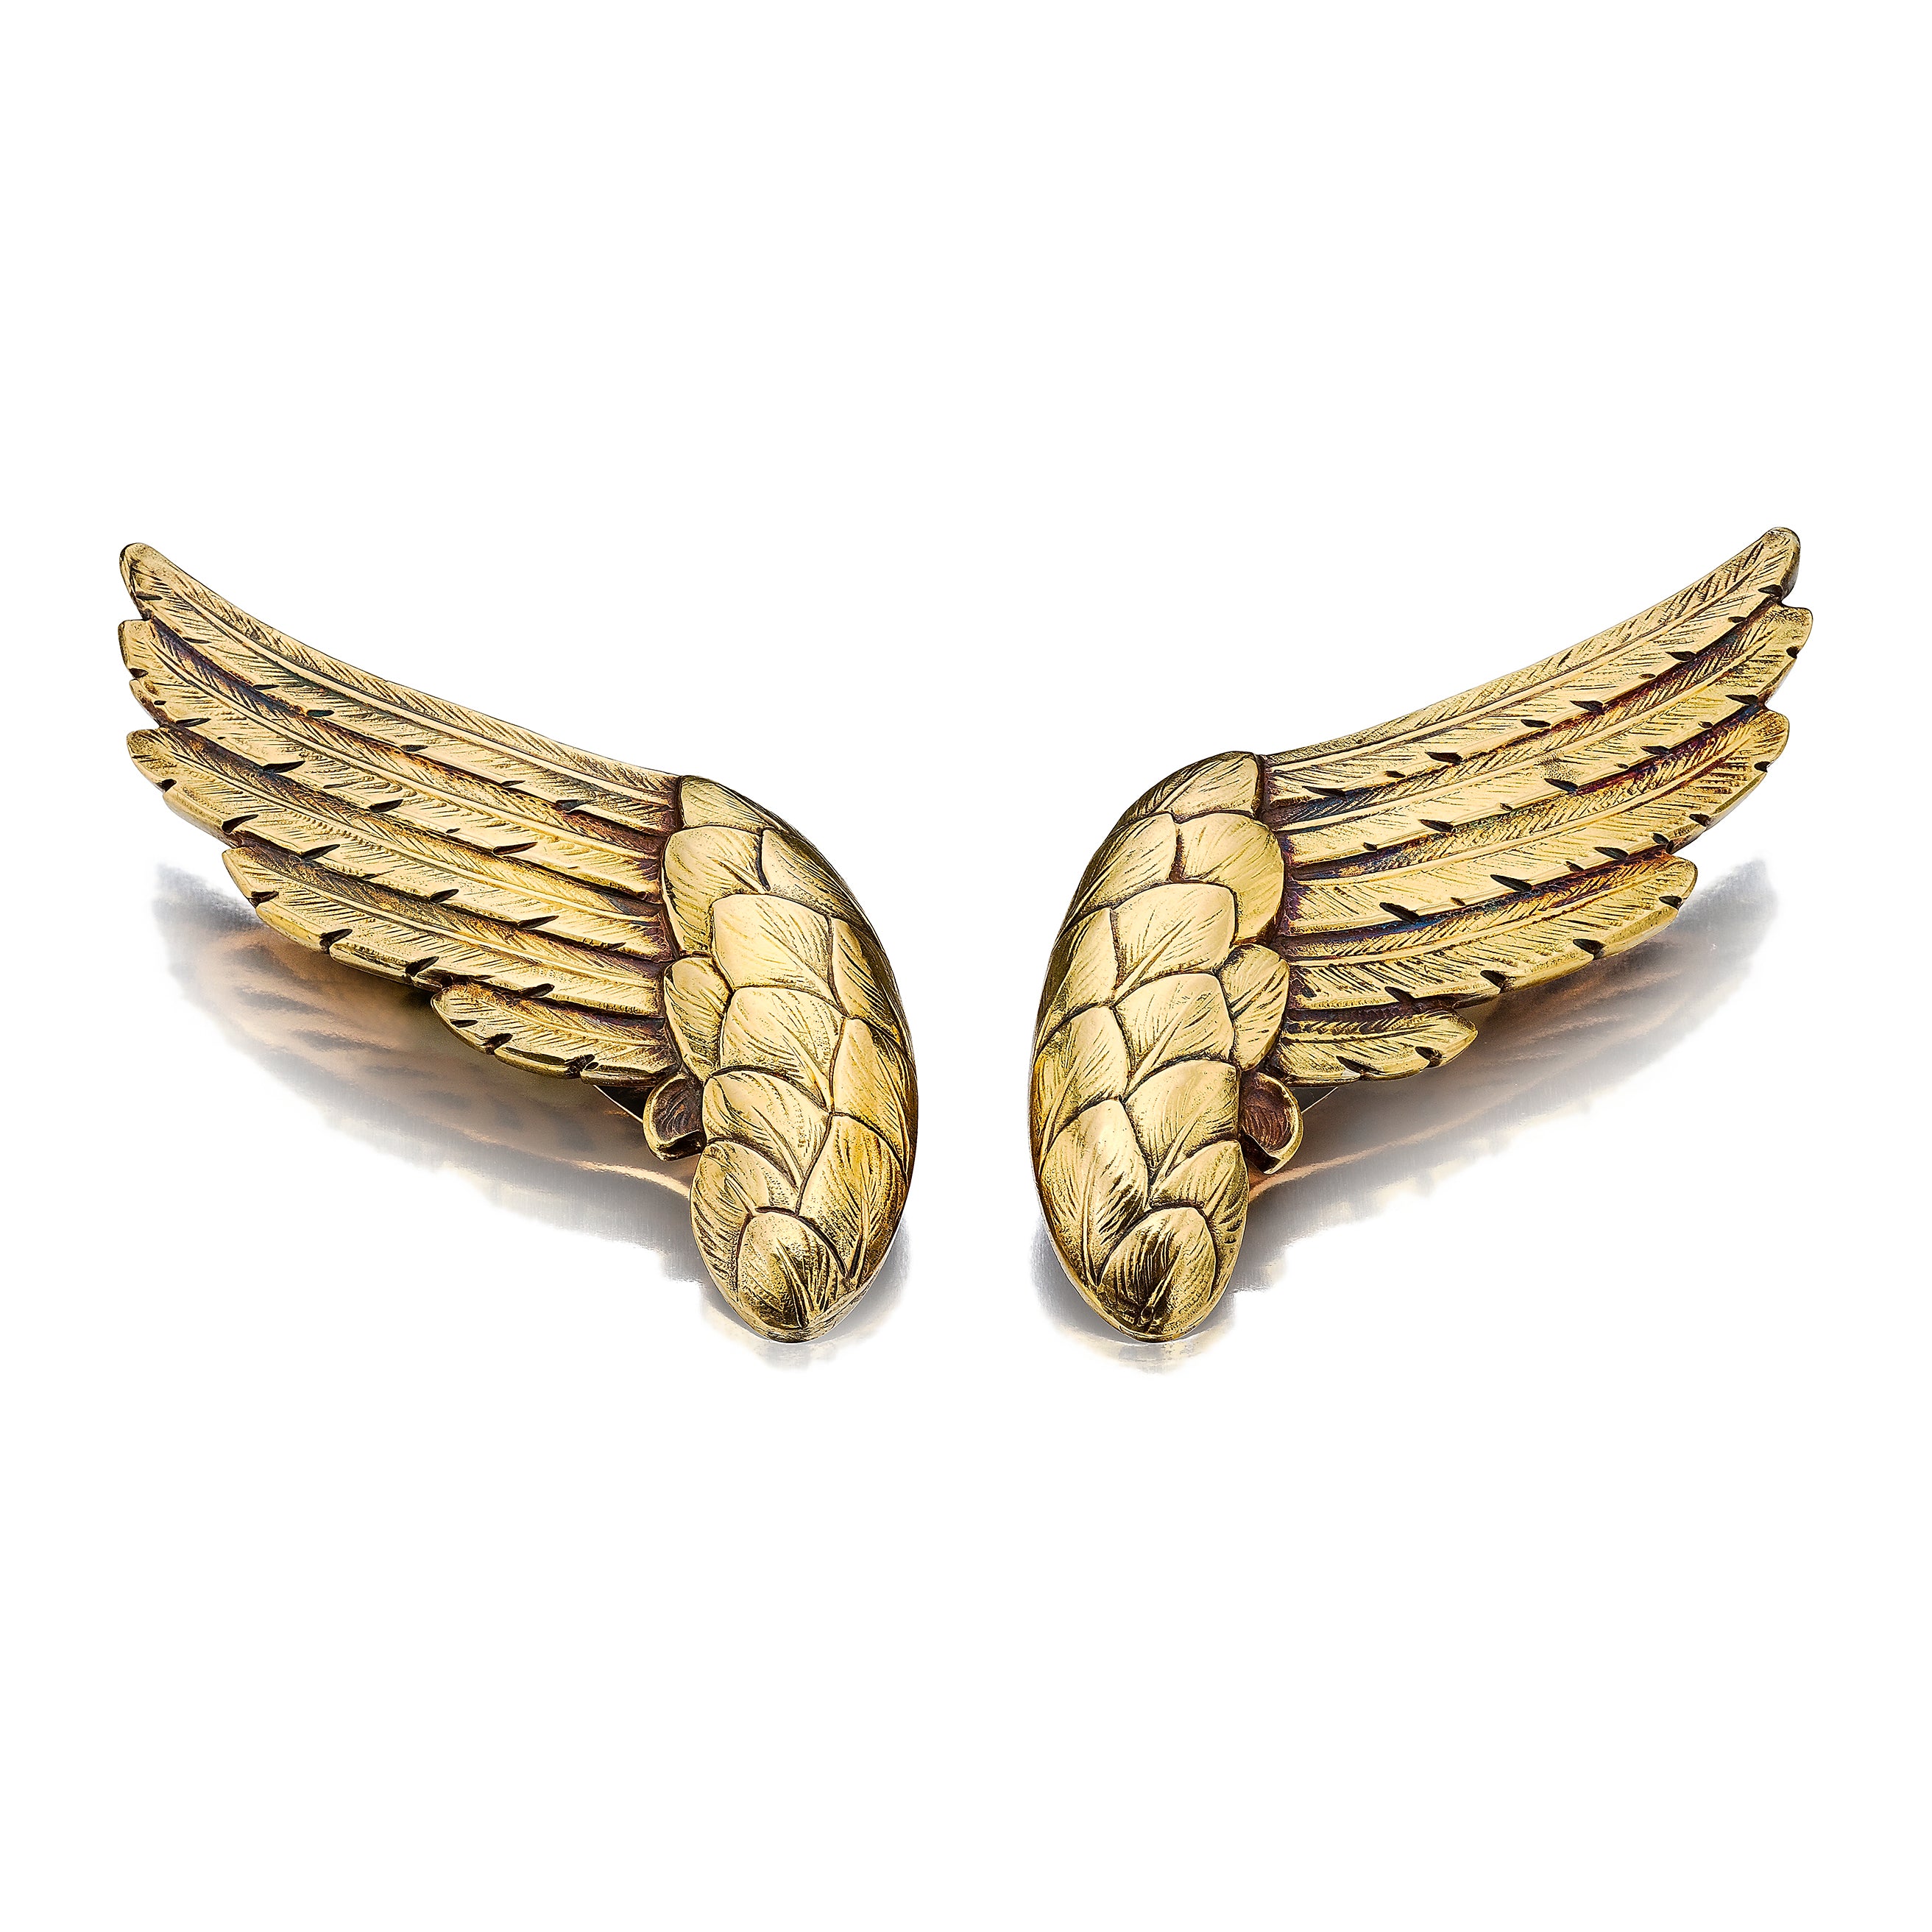 THE  DAISY  FELLOWES  “MERCURY”  WINGS: A  PAIR  OF  CLIPS  BY  FULCO  DI  VERDURA  FOR  COCO  CHANEL,  PARIS,  1934